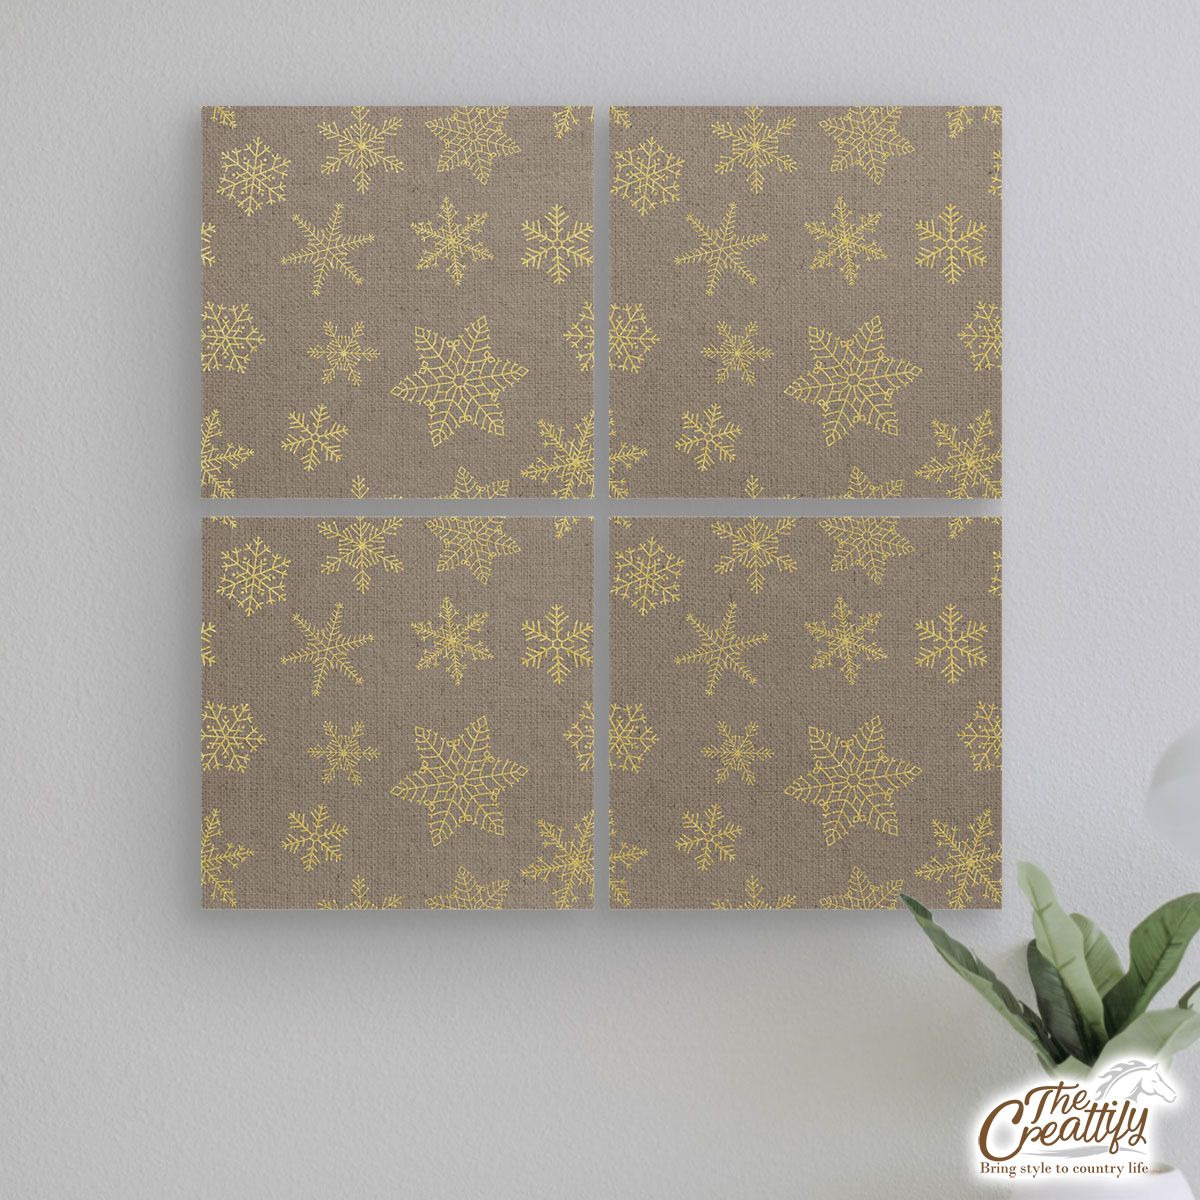 Snowflake Pattern, Christmas Snowflakes, Christmas Present Ideas Mural With Frame